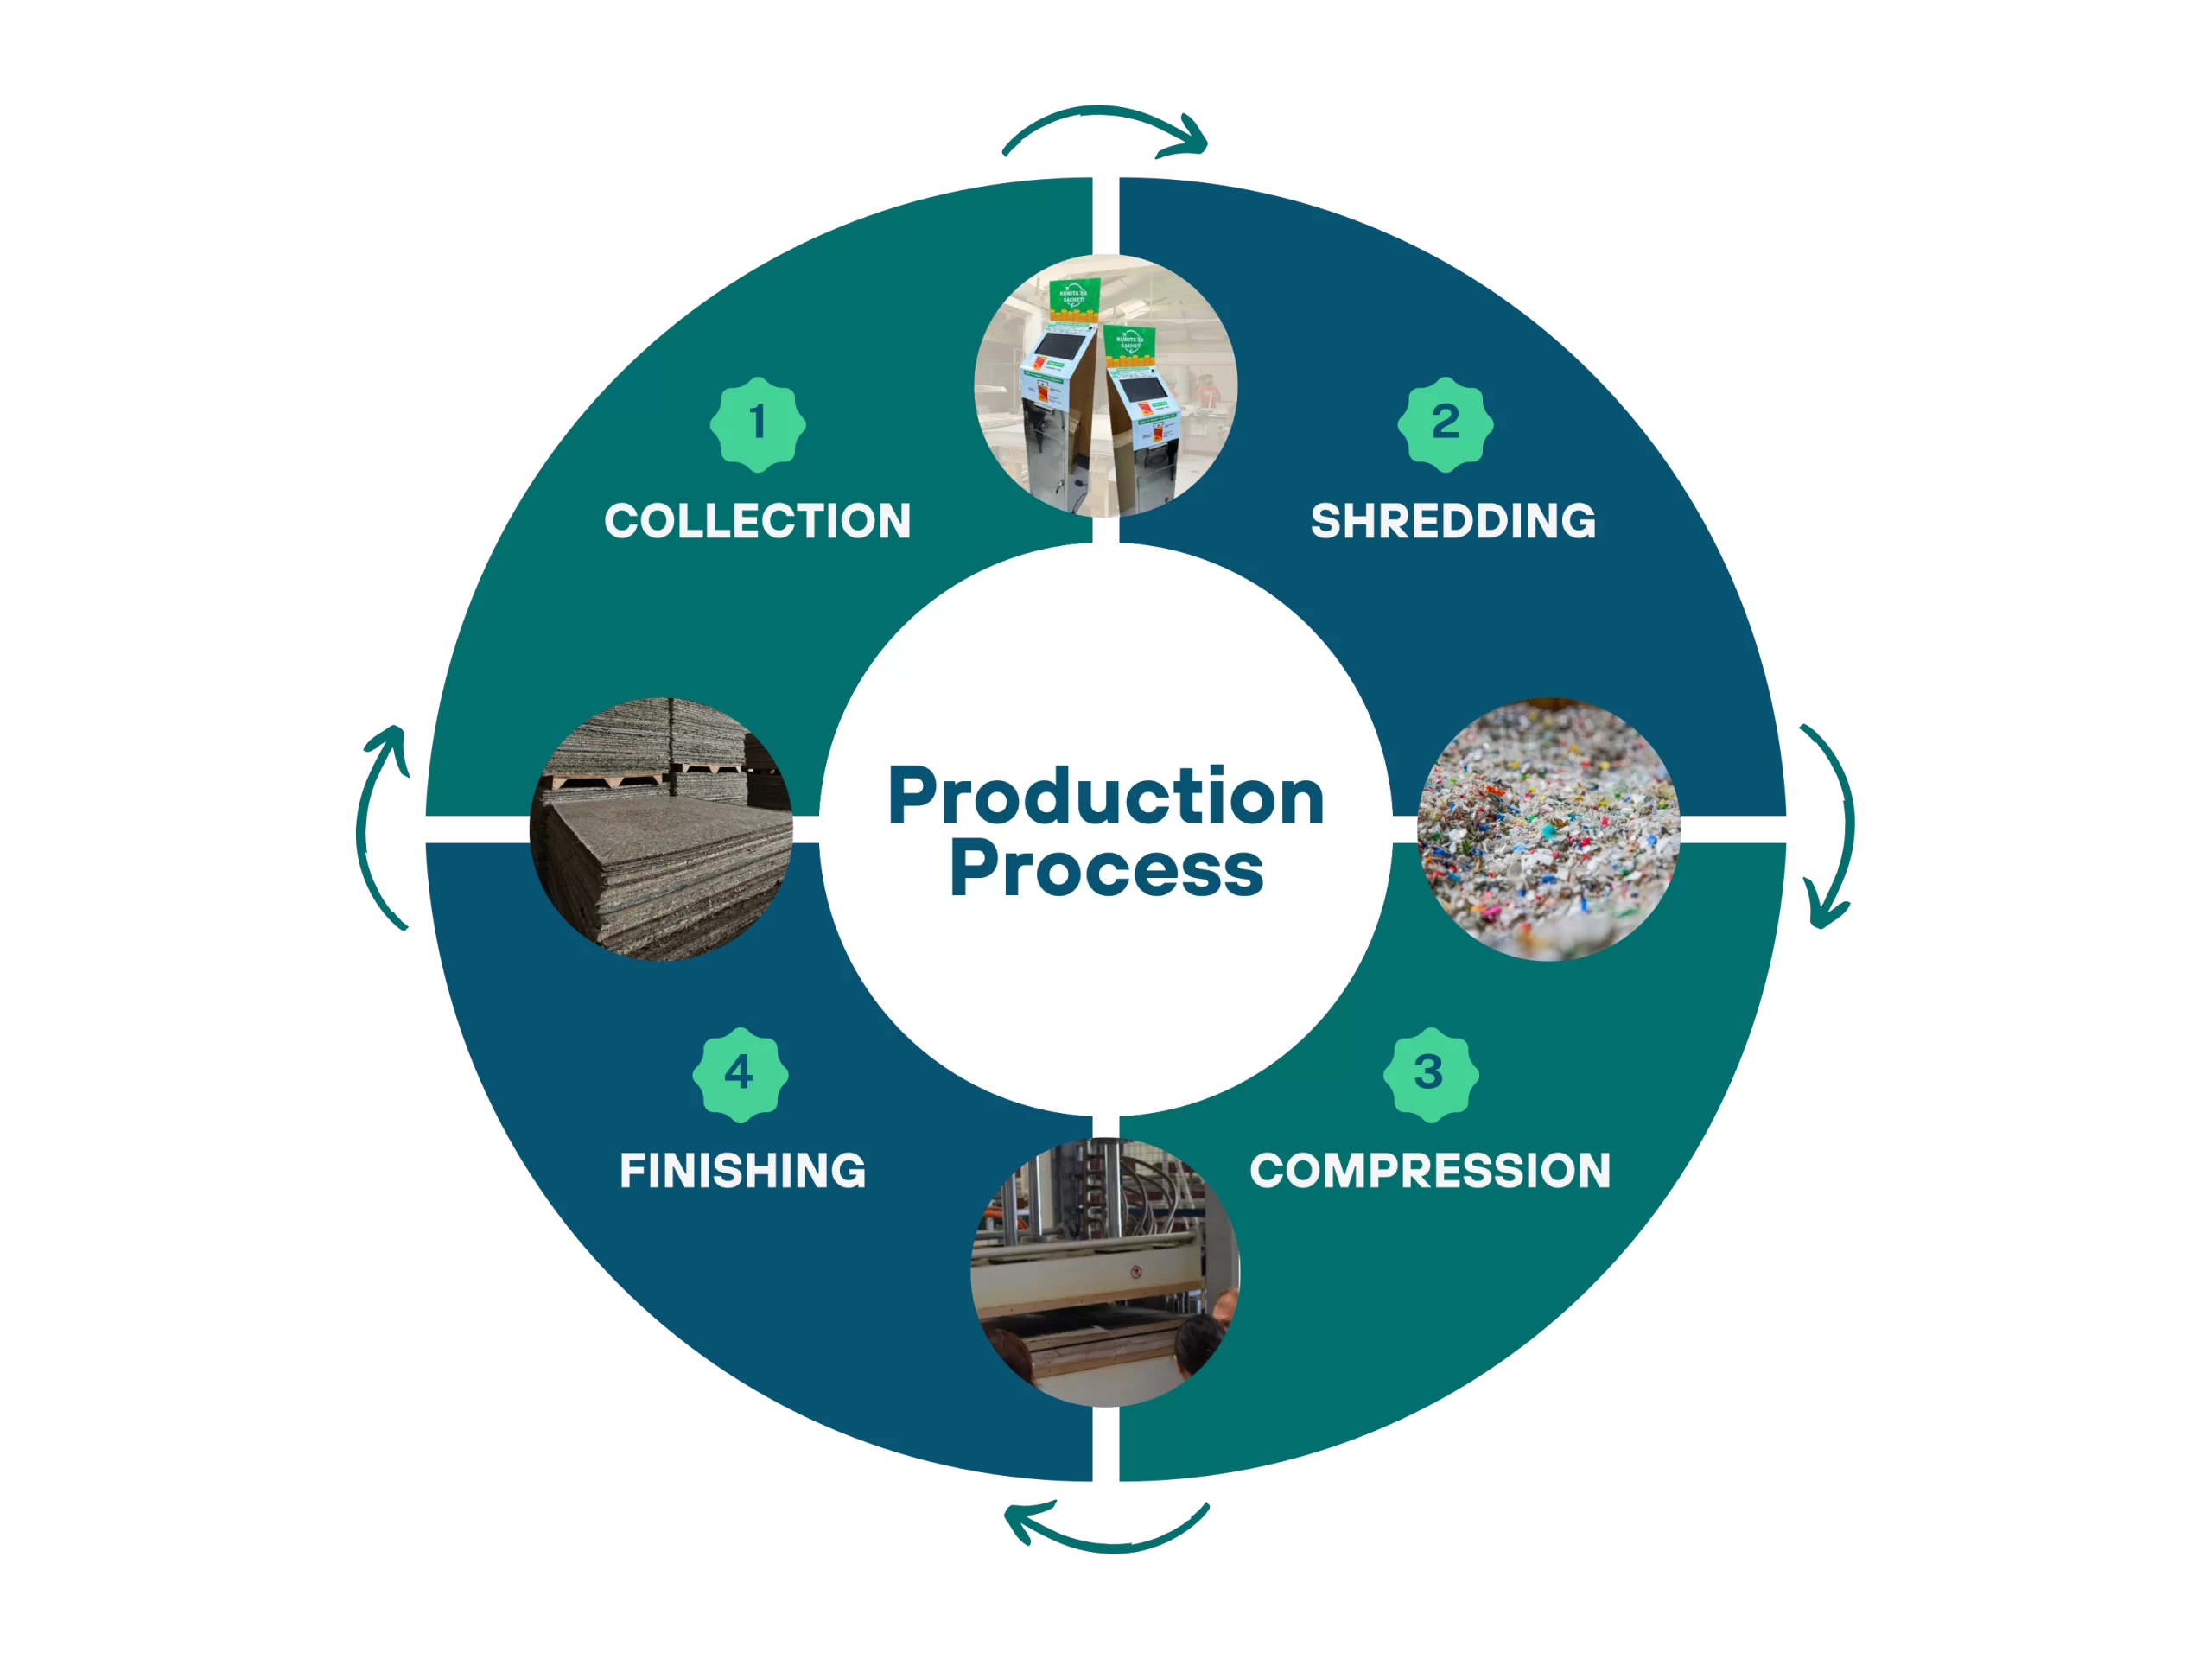 Production Process in Restore Circular economy recycling mechanical recycling sustainability